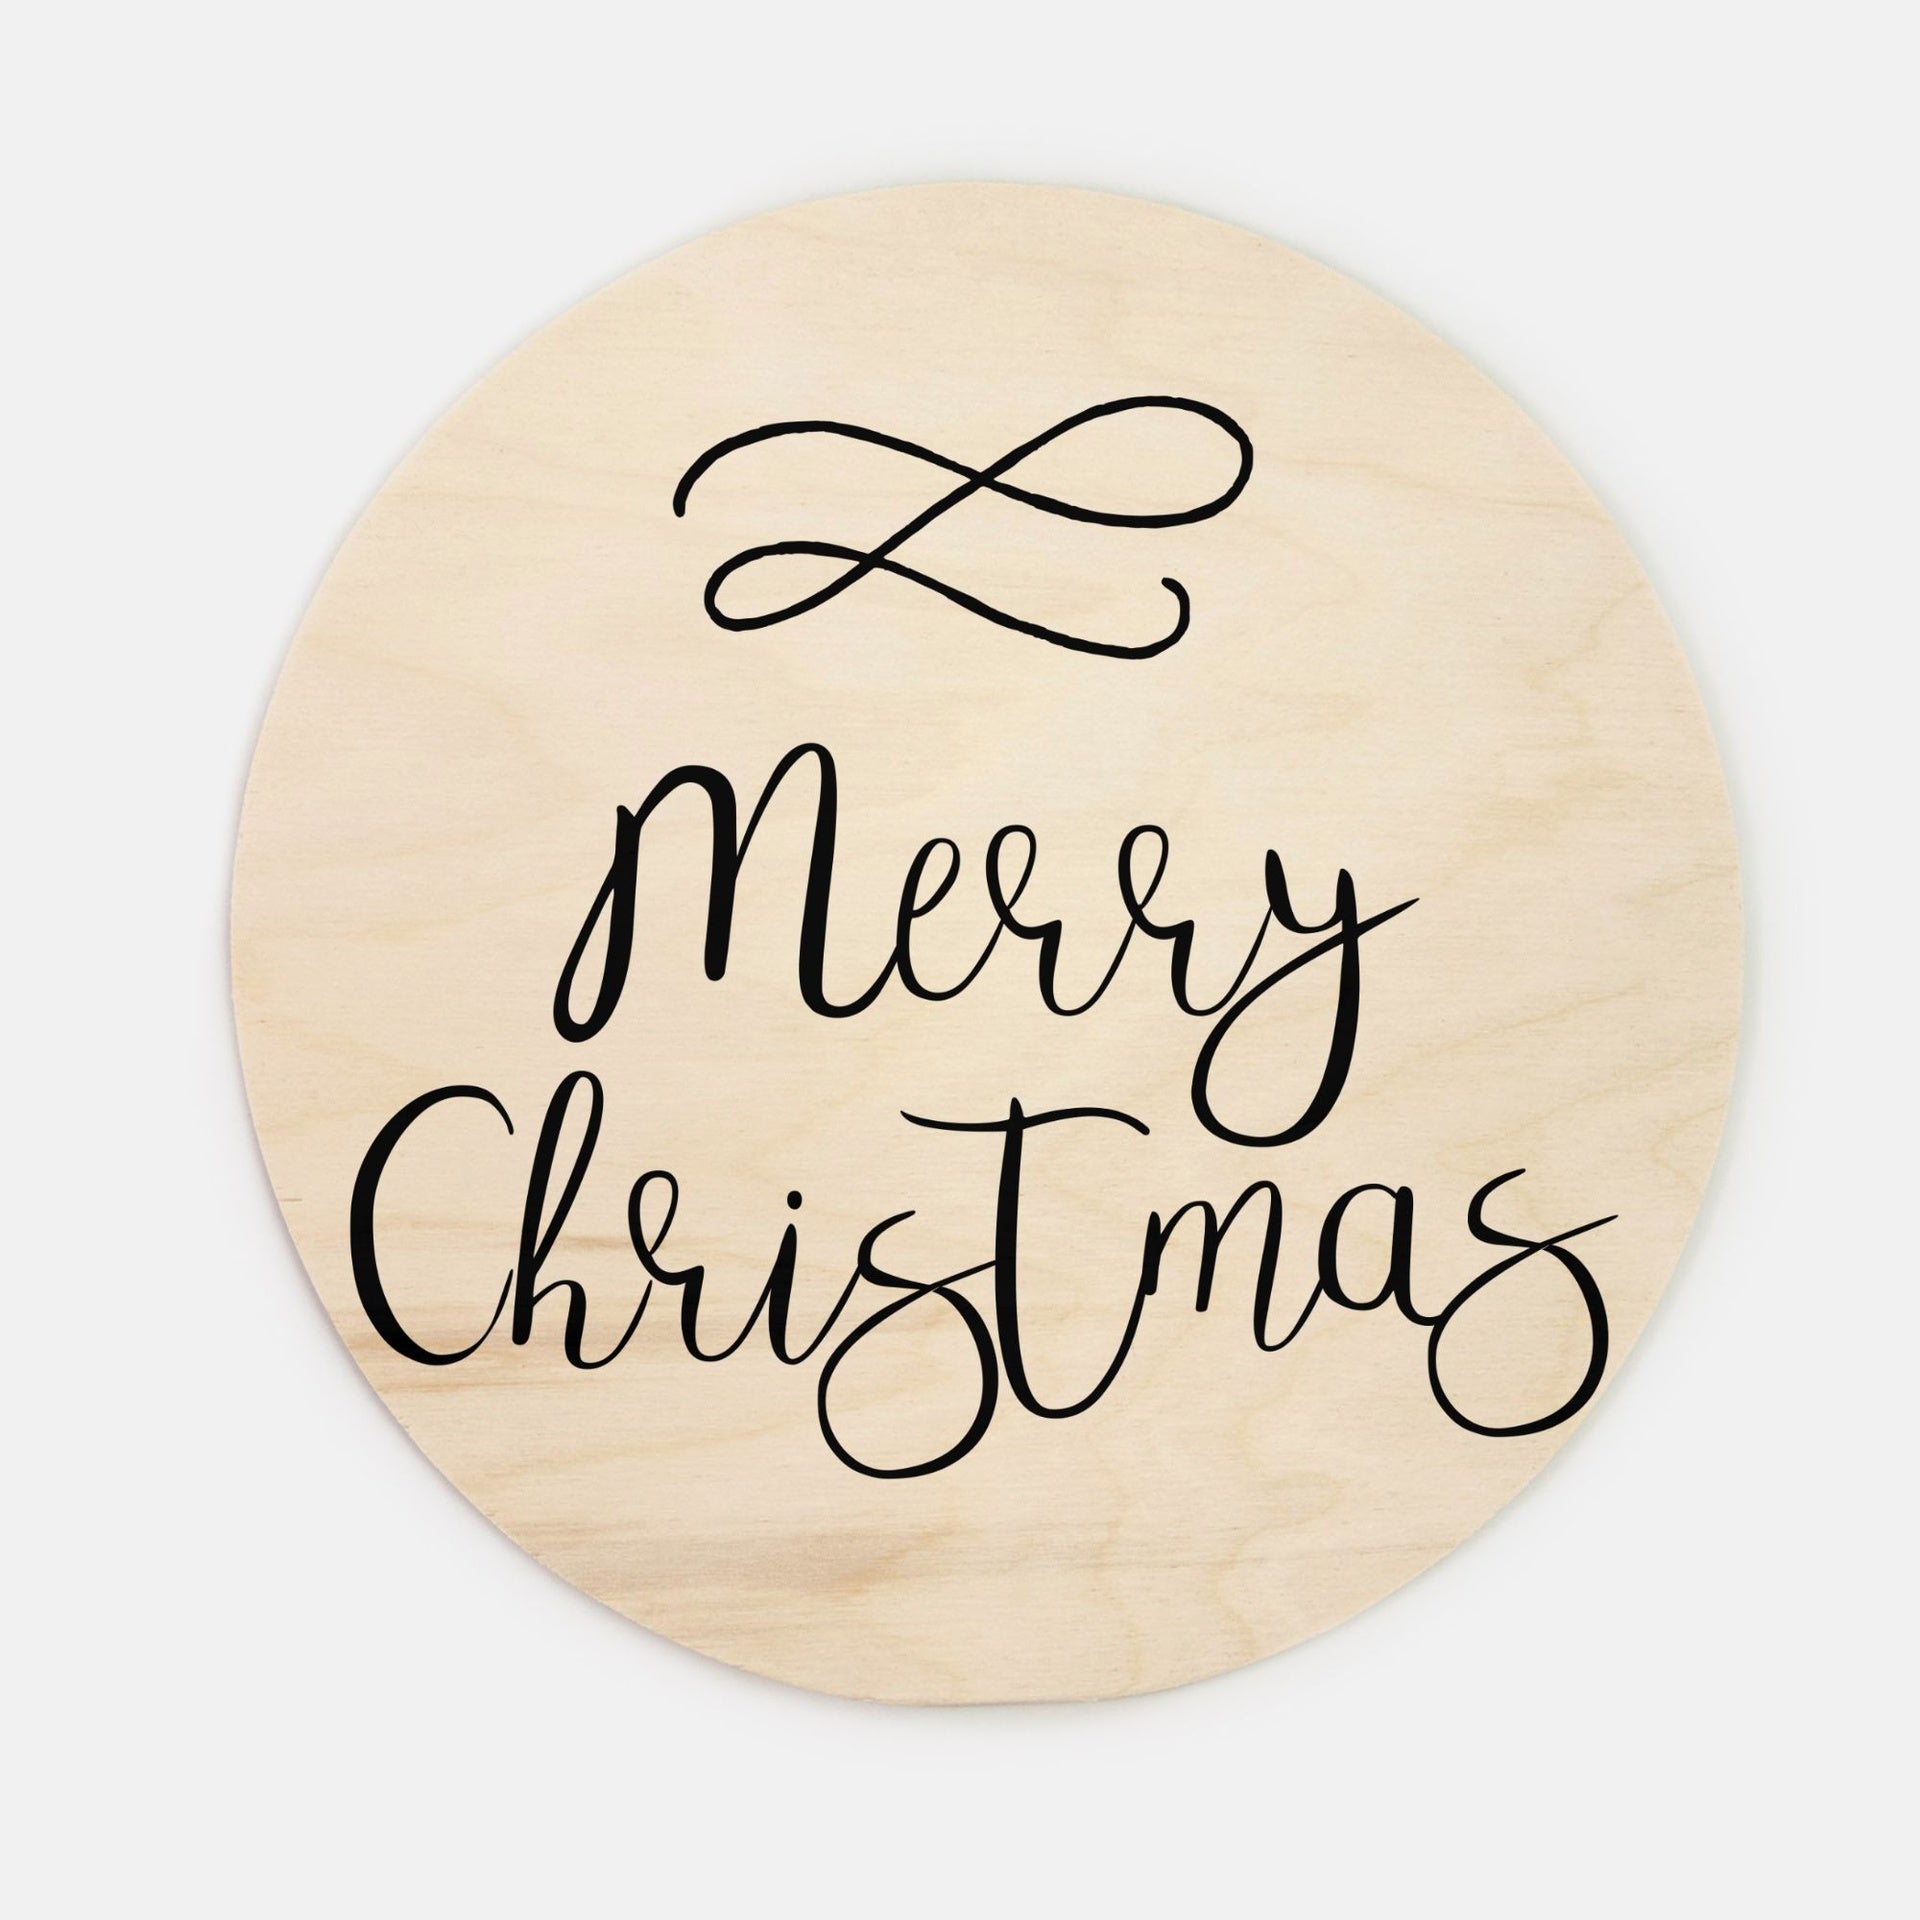 10" Round Wood Sign - Cursive Merry Christmas